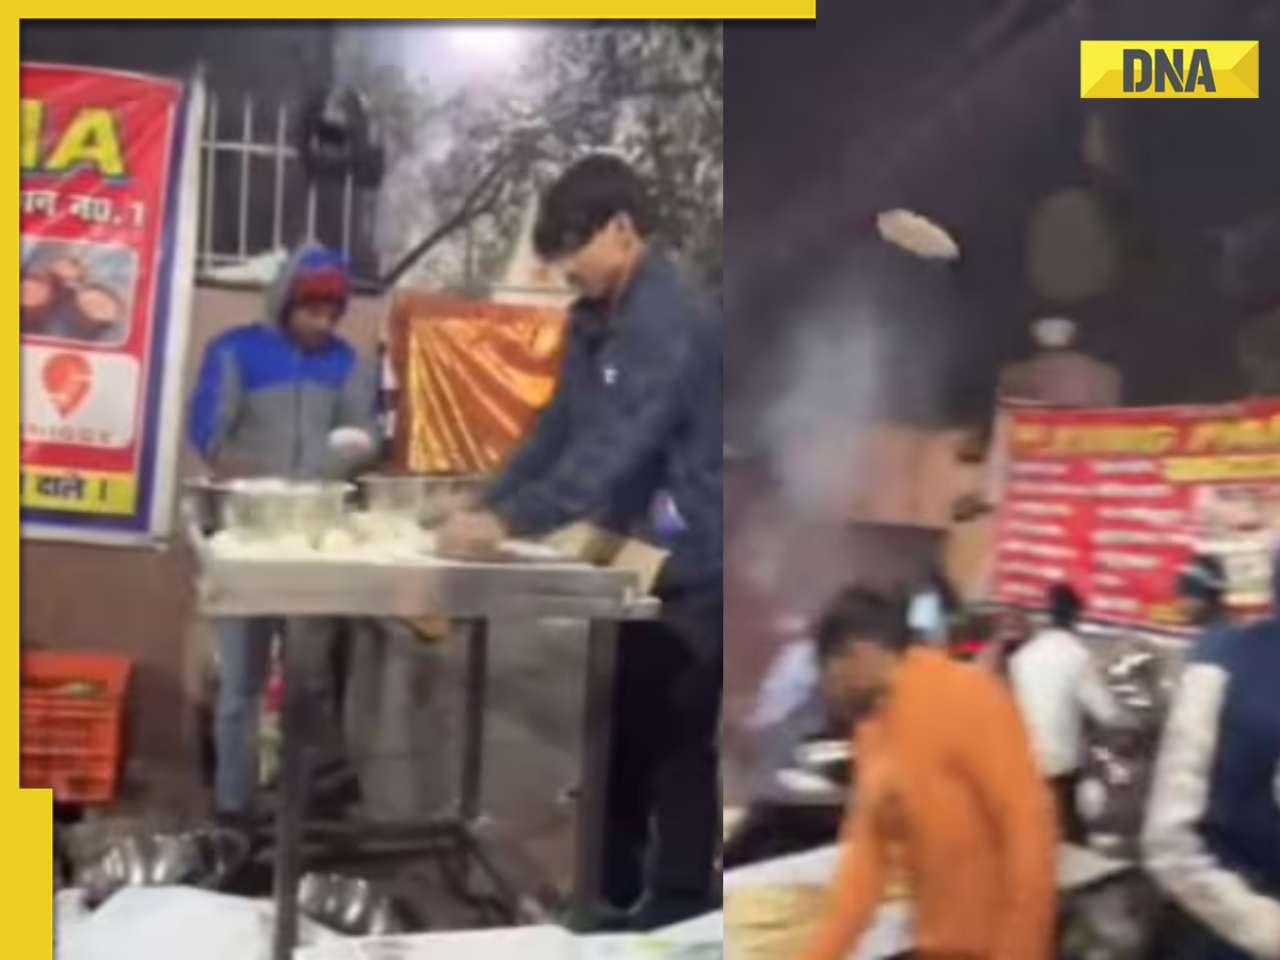 Street vendor shows incredible dough-tossing skills in viral video, internet is impressed